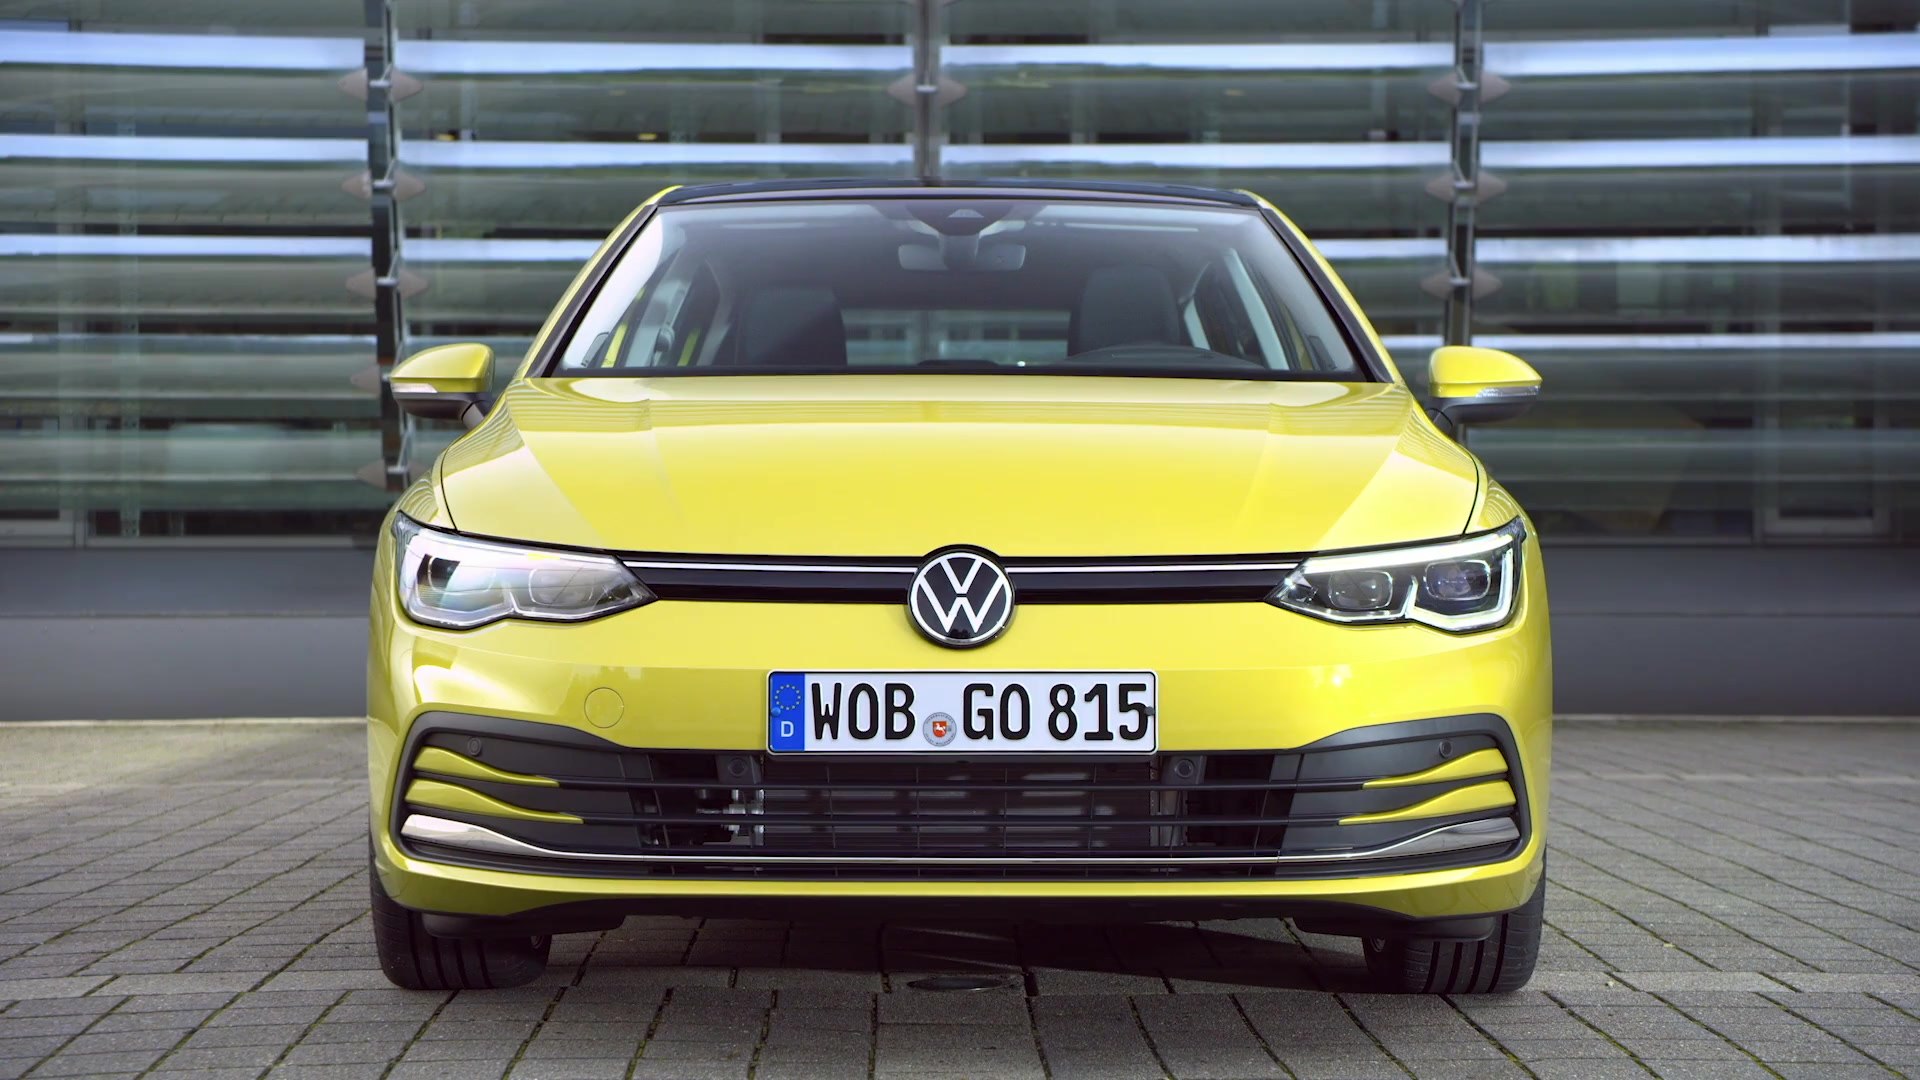 The new Volkswagen Golf 8 - Exterior Design in Lime Yellow - video  Dailymotion